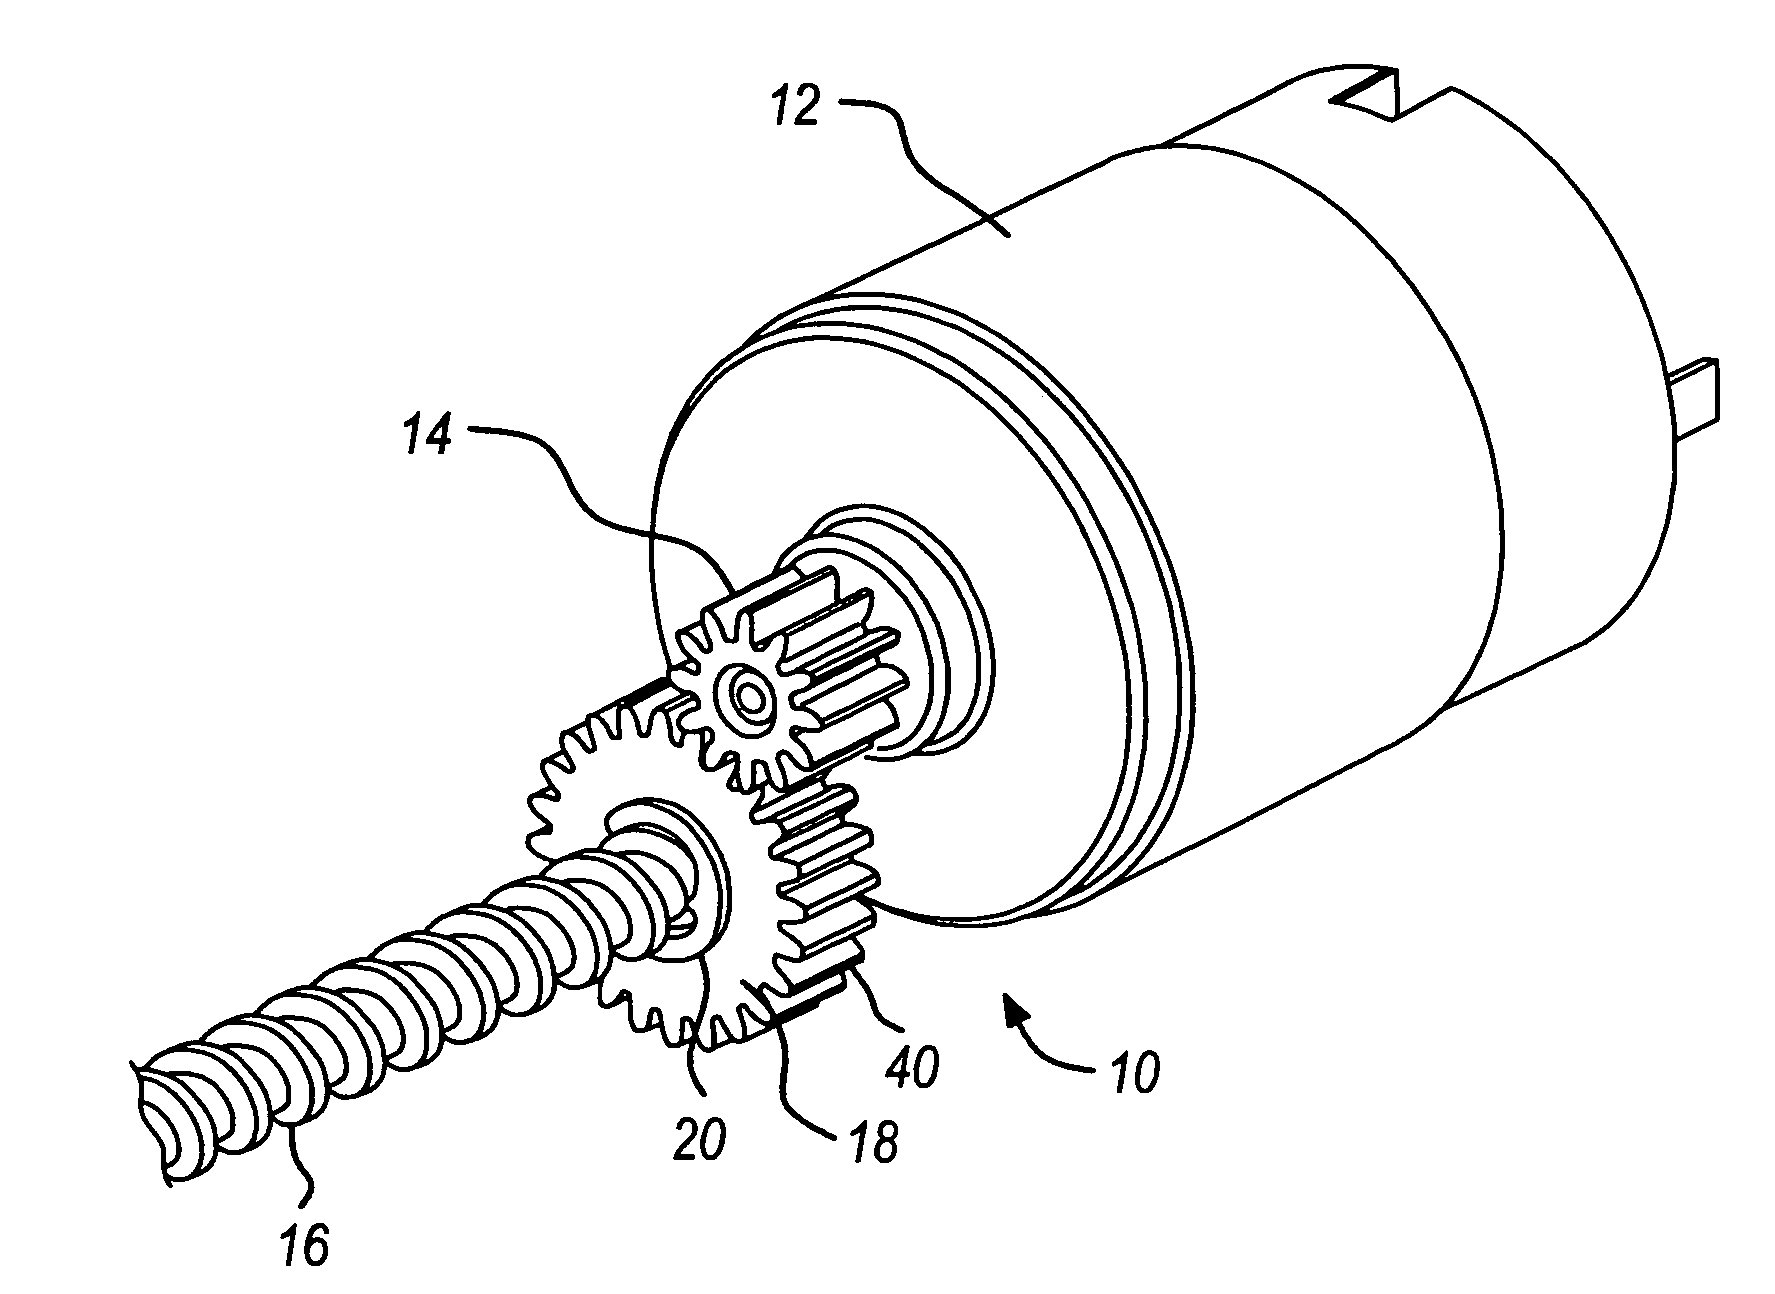 Actuator structure and method for attaching a gear or pulley to lead screw